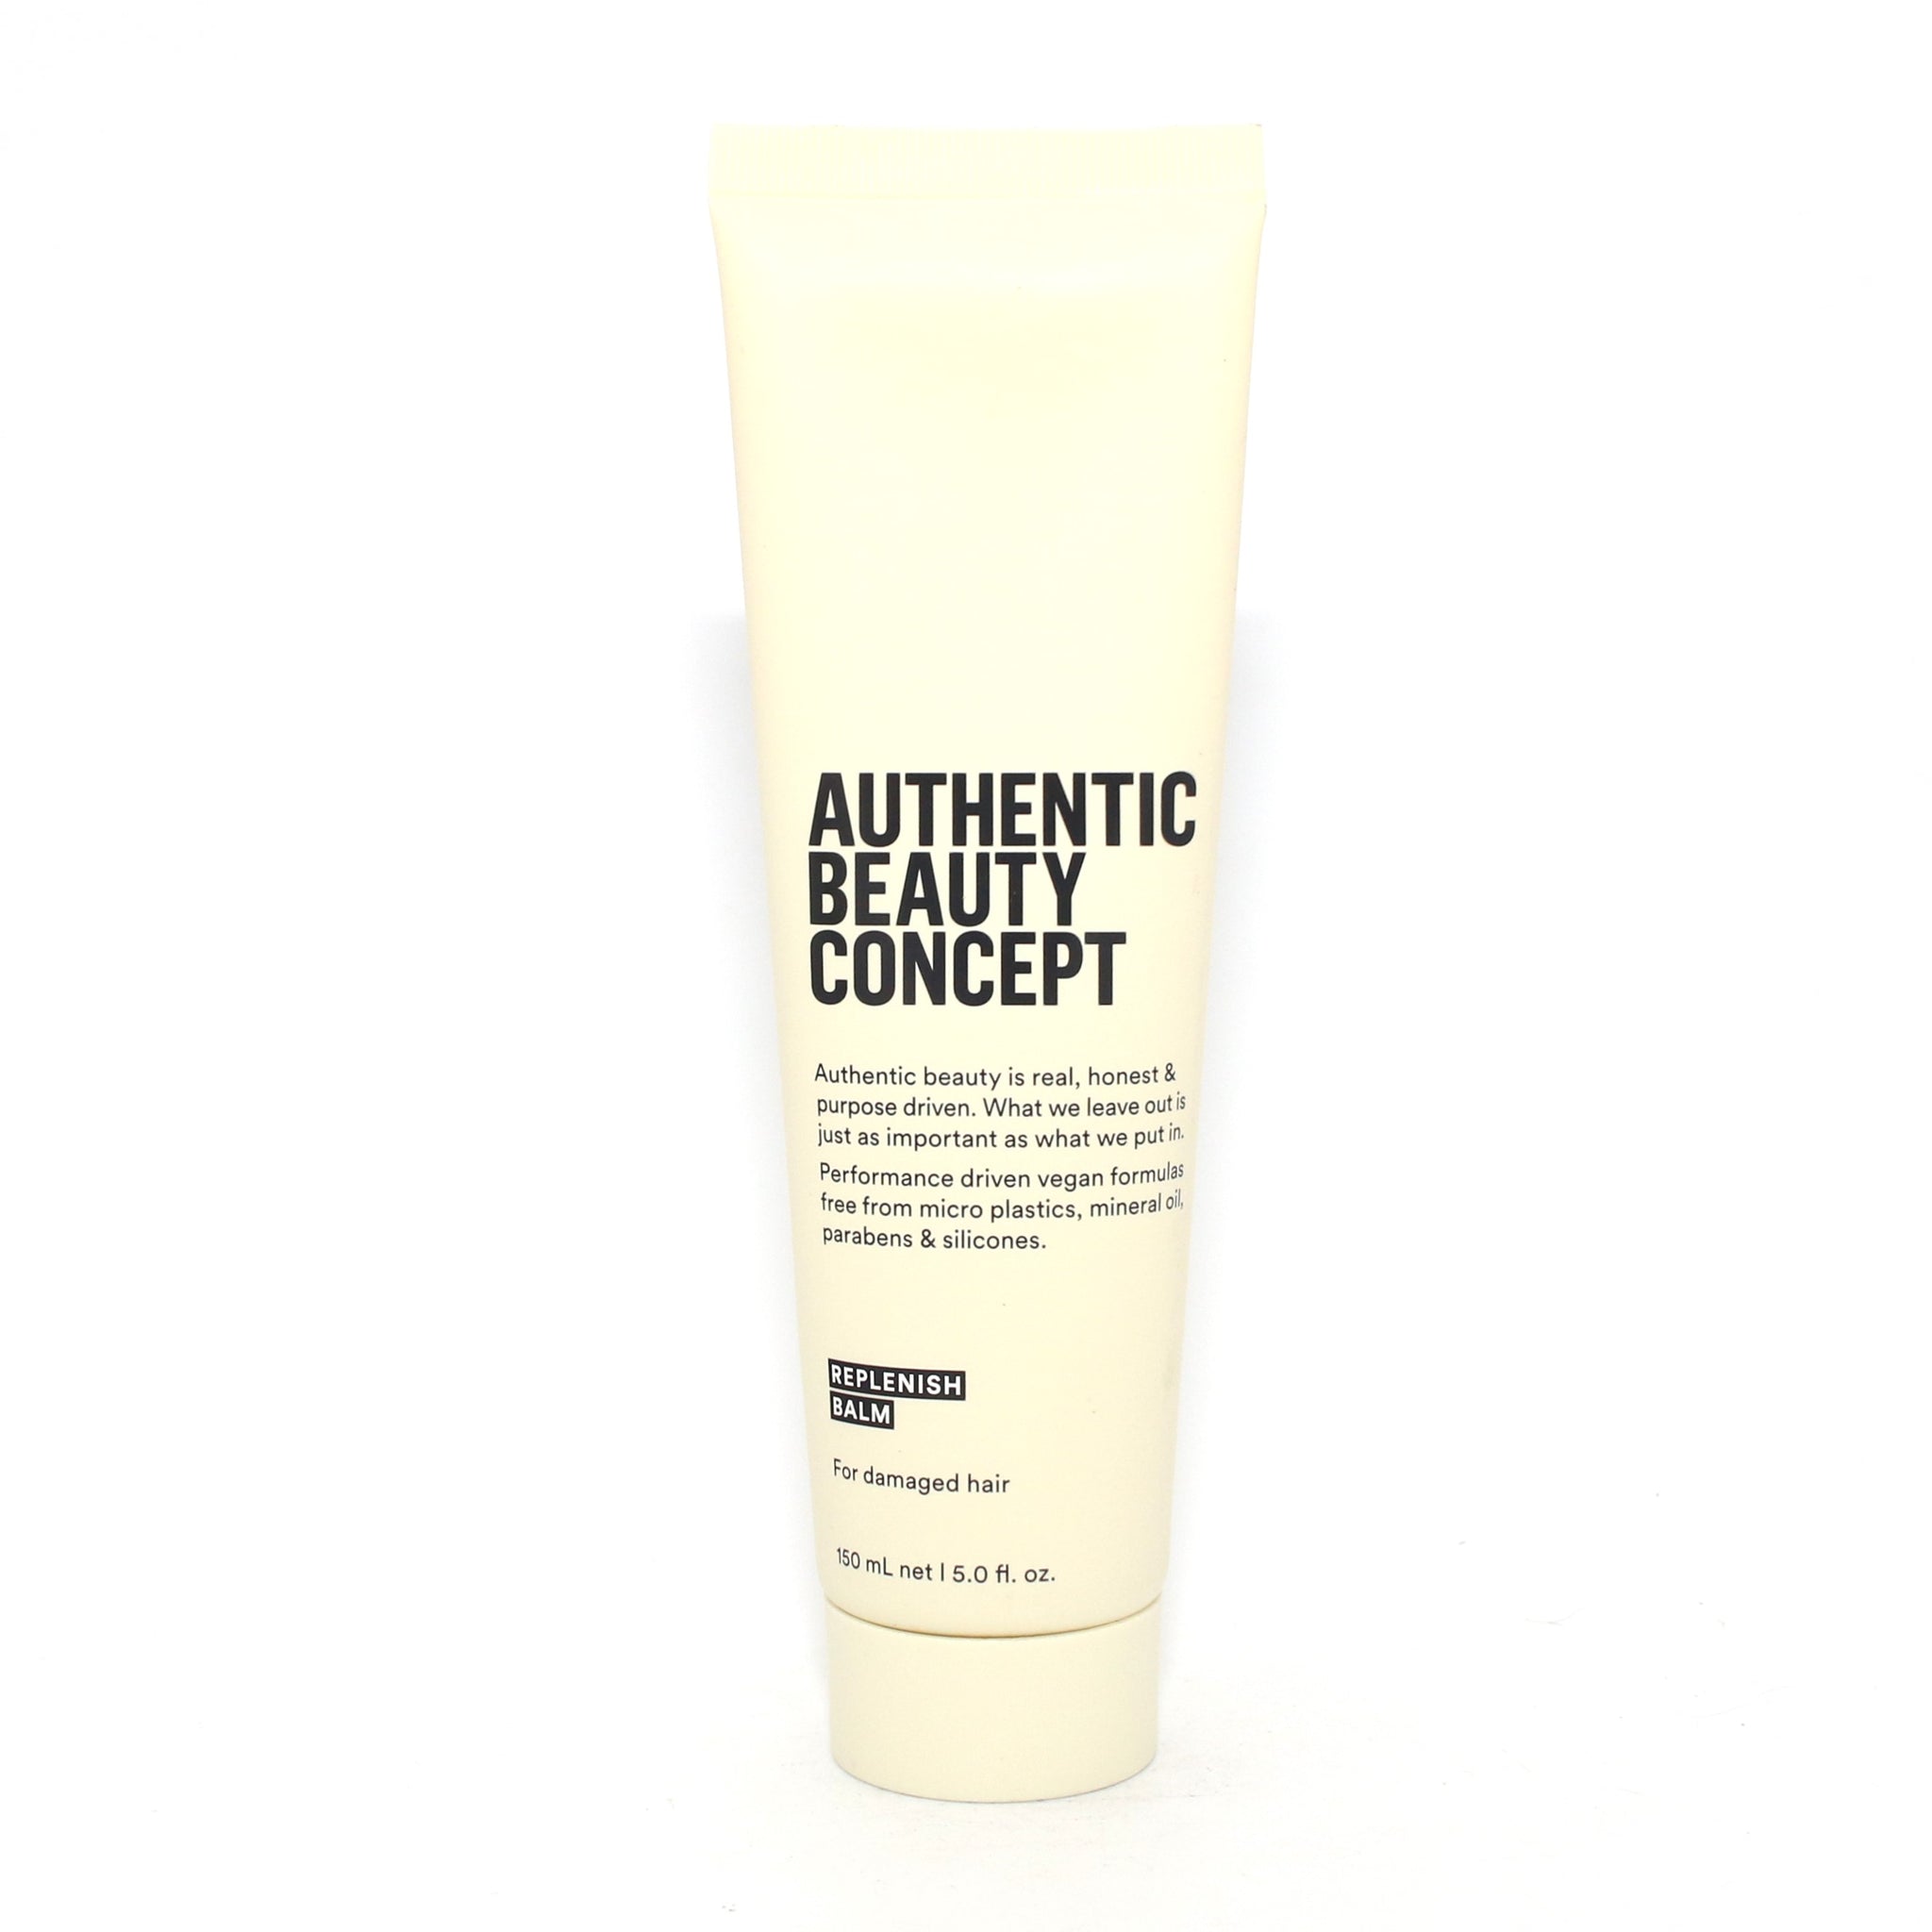 Authentic Beauty Concept Replenish Balm for Damaged Hair 5 oz